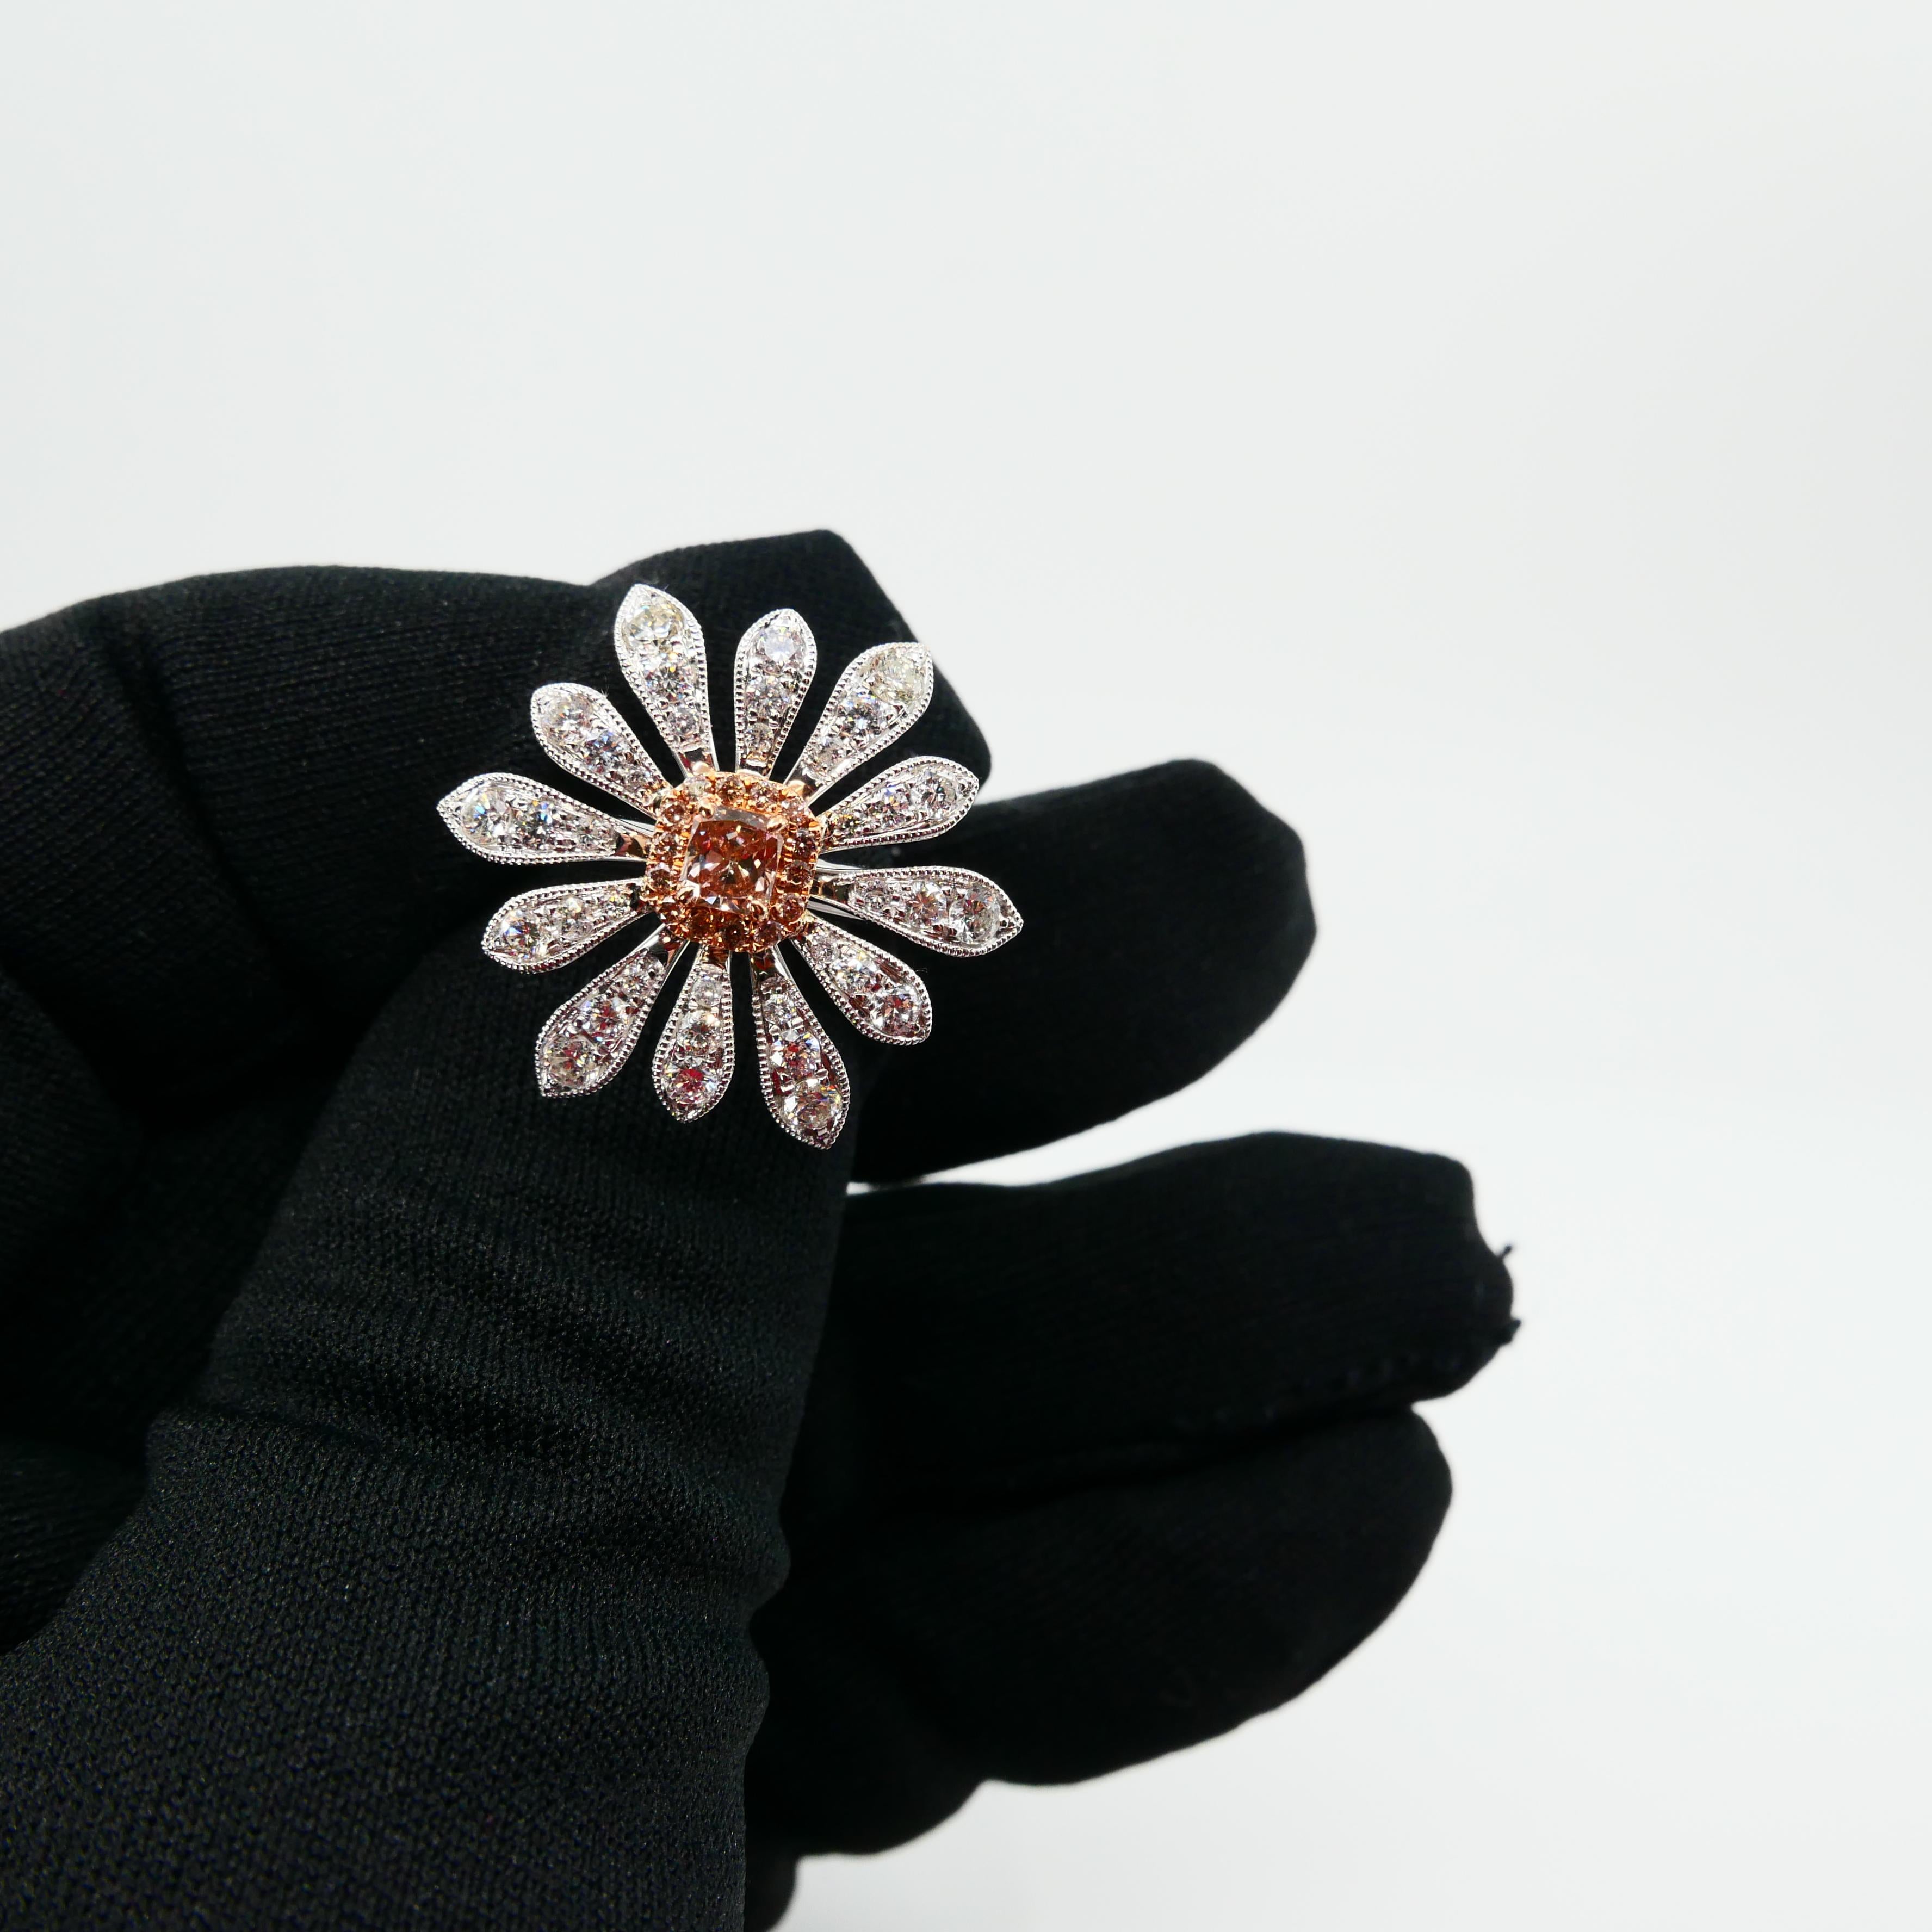 0.26 Carat Natural Fancy Pink Diamond and White Diamond Flower Cocktail Ring For Sale 9